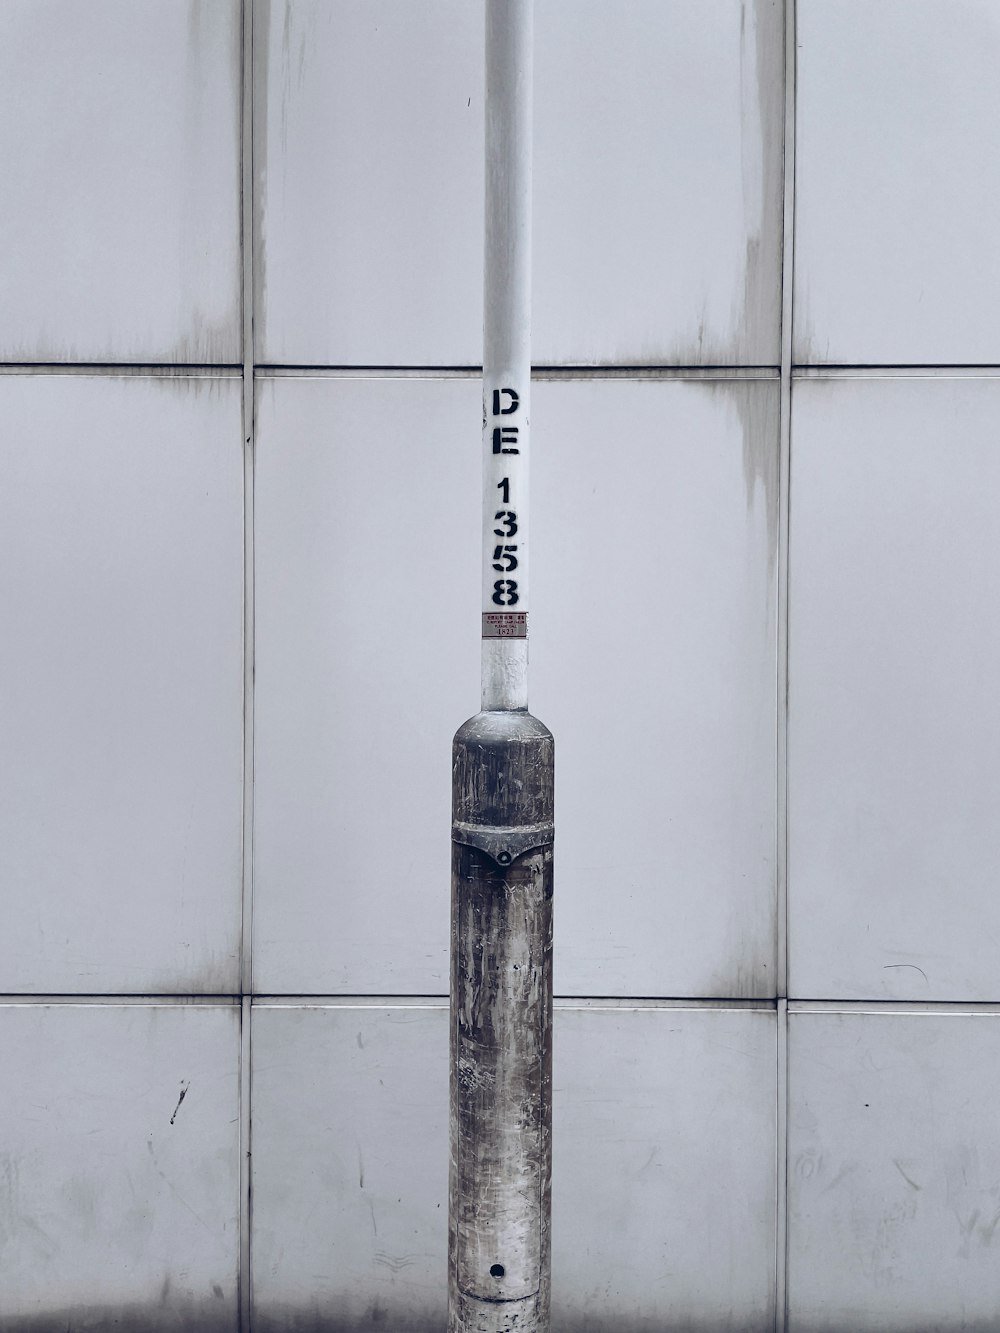 a metal pole with a street sign on it